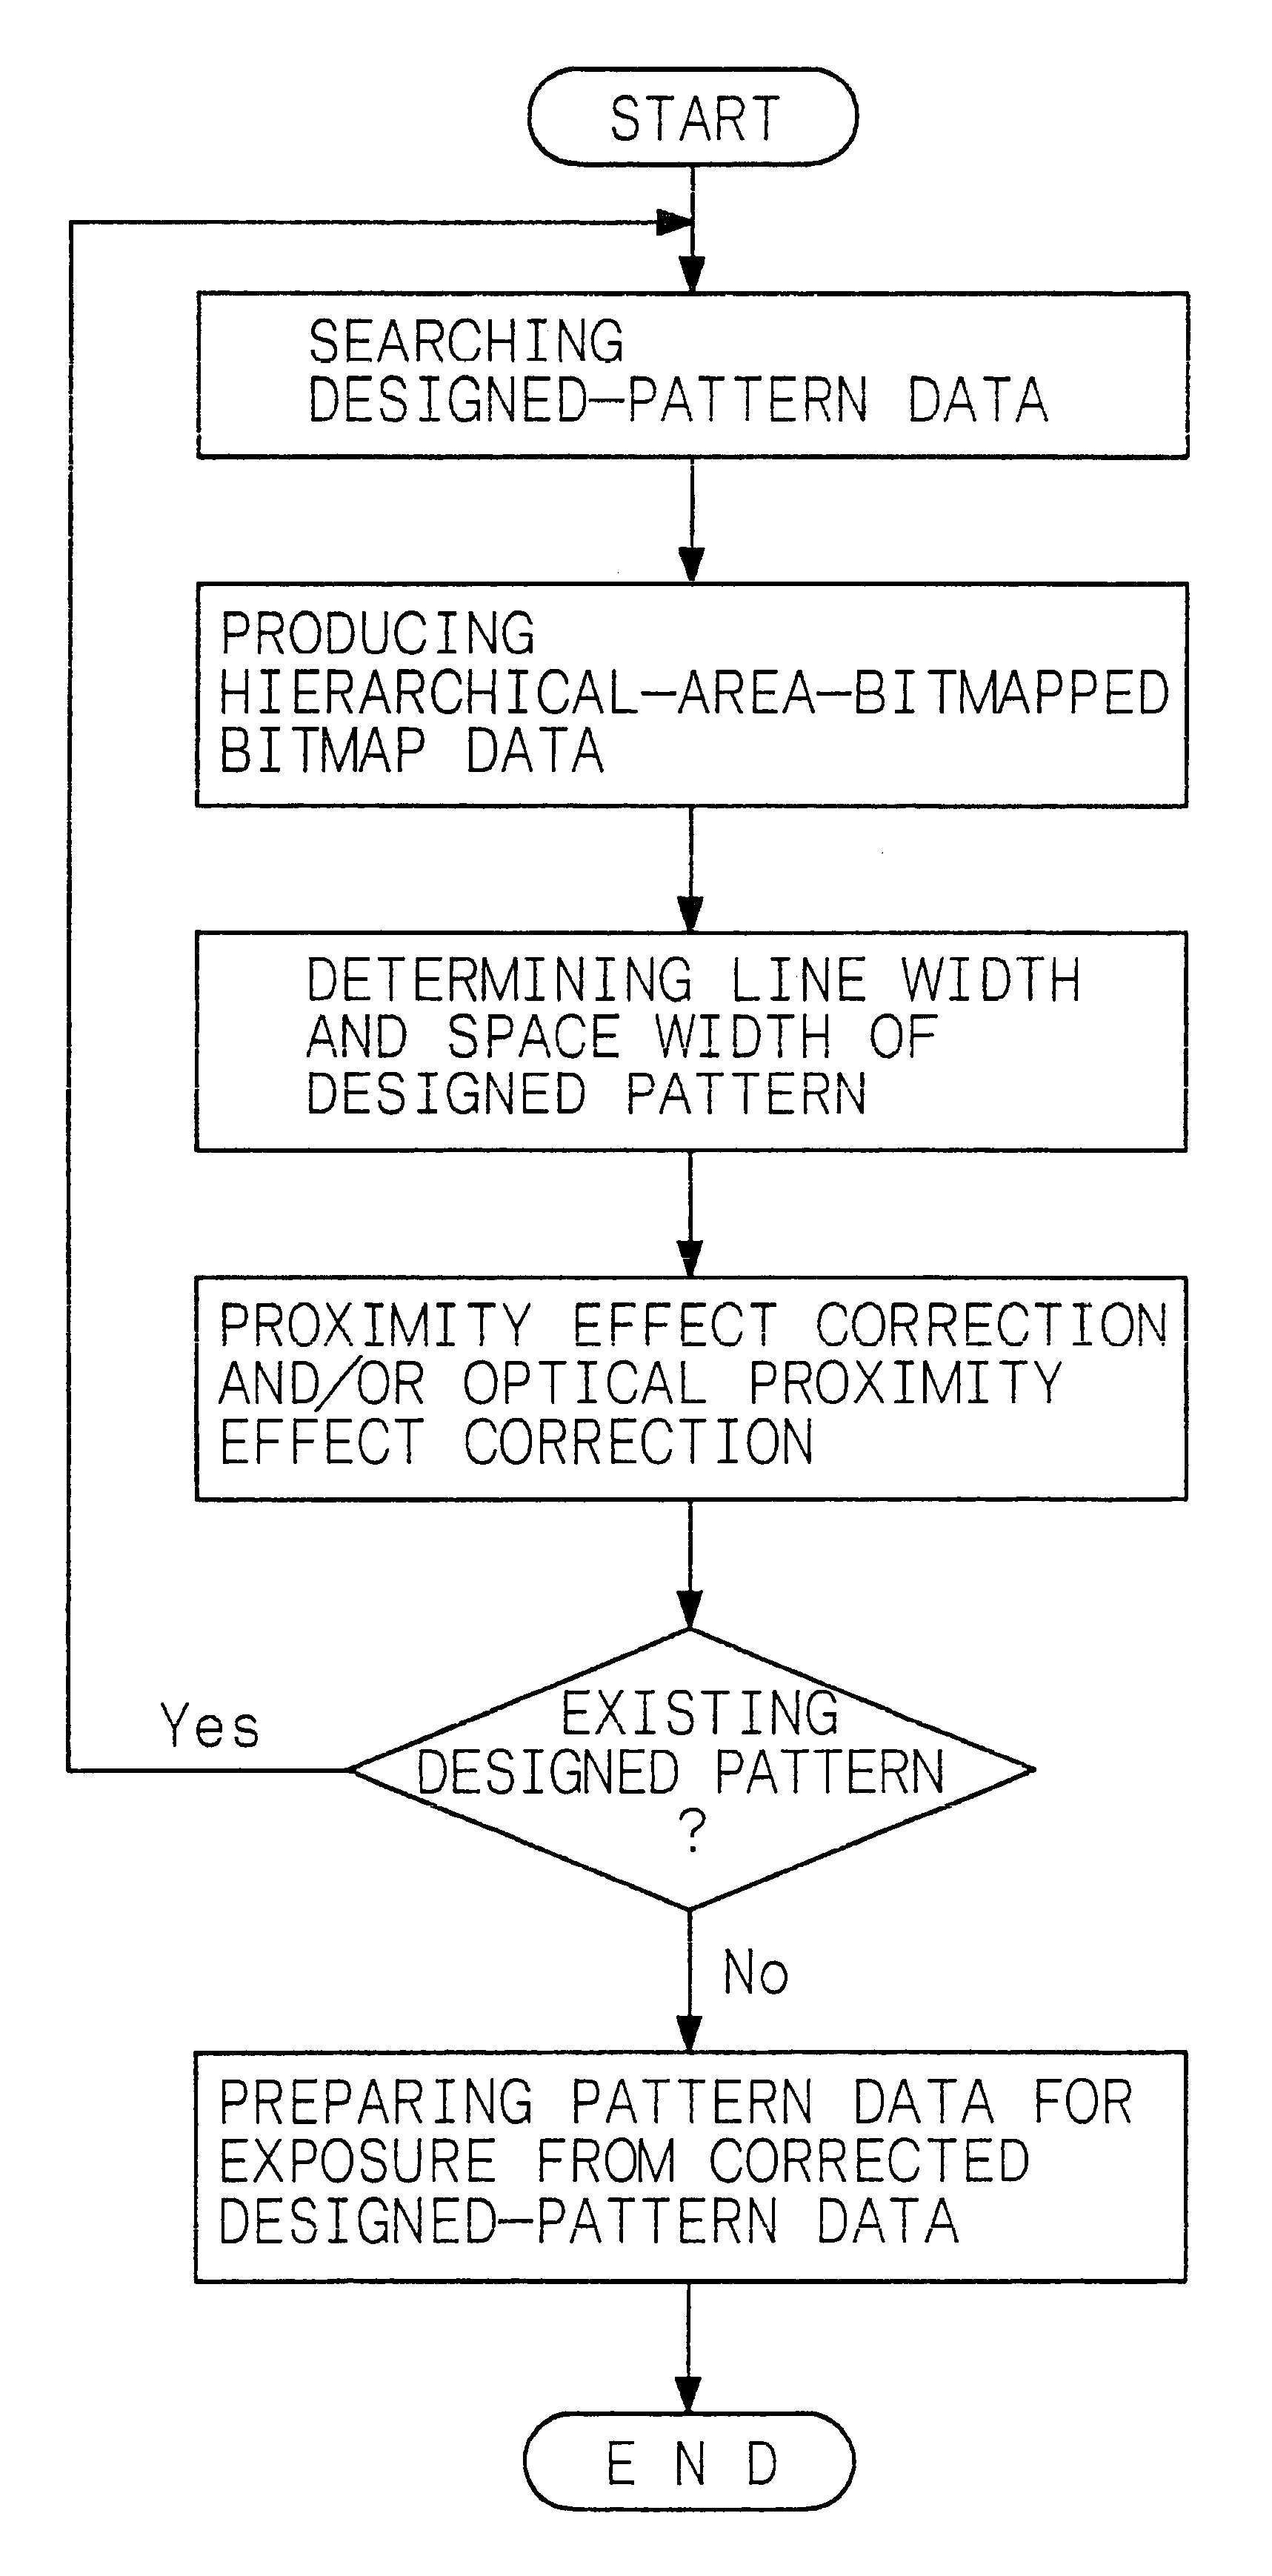 Method and apparatus of correcting design-patterned data, method of electron beam and optical exposure, method of fabricating semiconductor and photomask devices